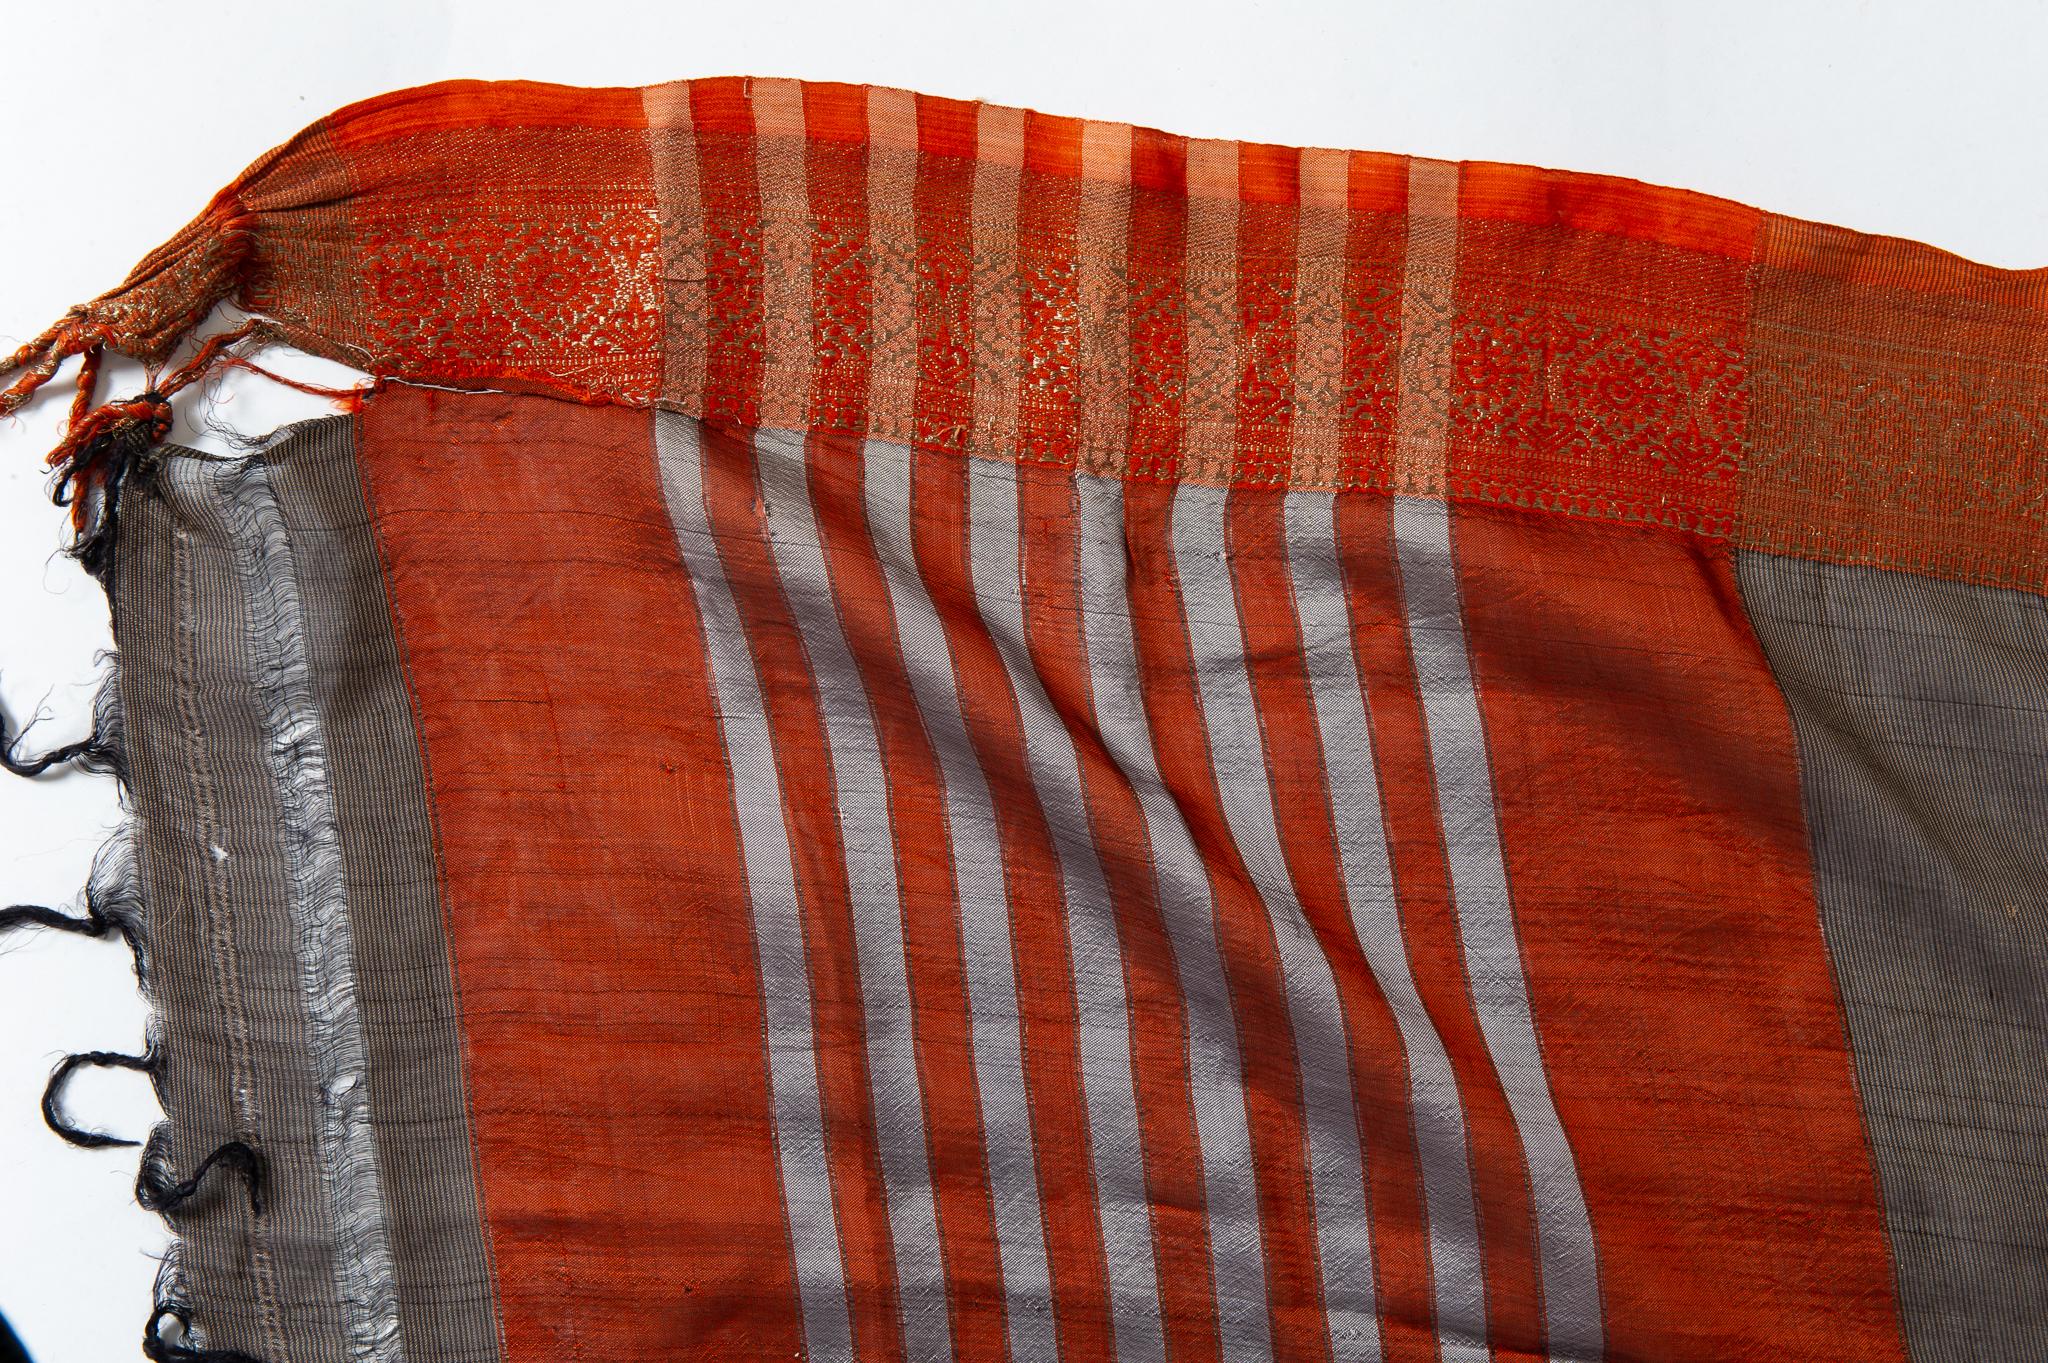  Indian Sari Brown Color, Brik Red and Gold Border, also Evening Summer Dress For Sale 2